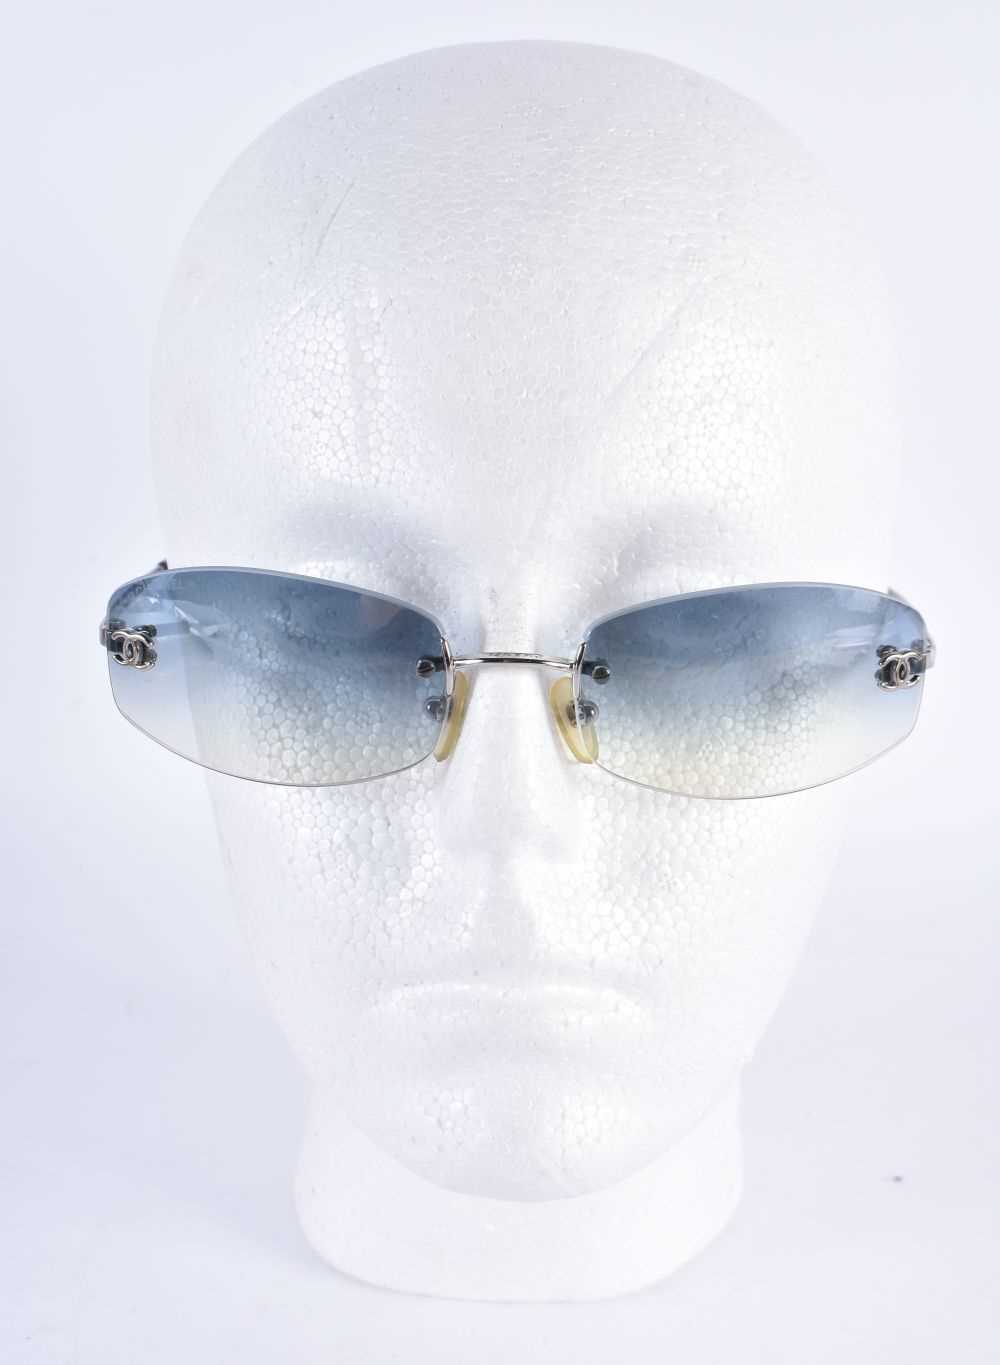 TWO PAIRS OF SUNGLASSES Fendi & Chanel. 15 cm wide. (2) - Image 2 of 5